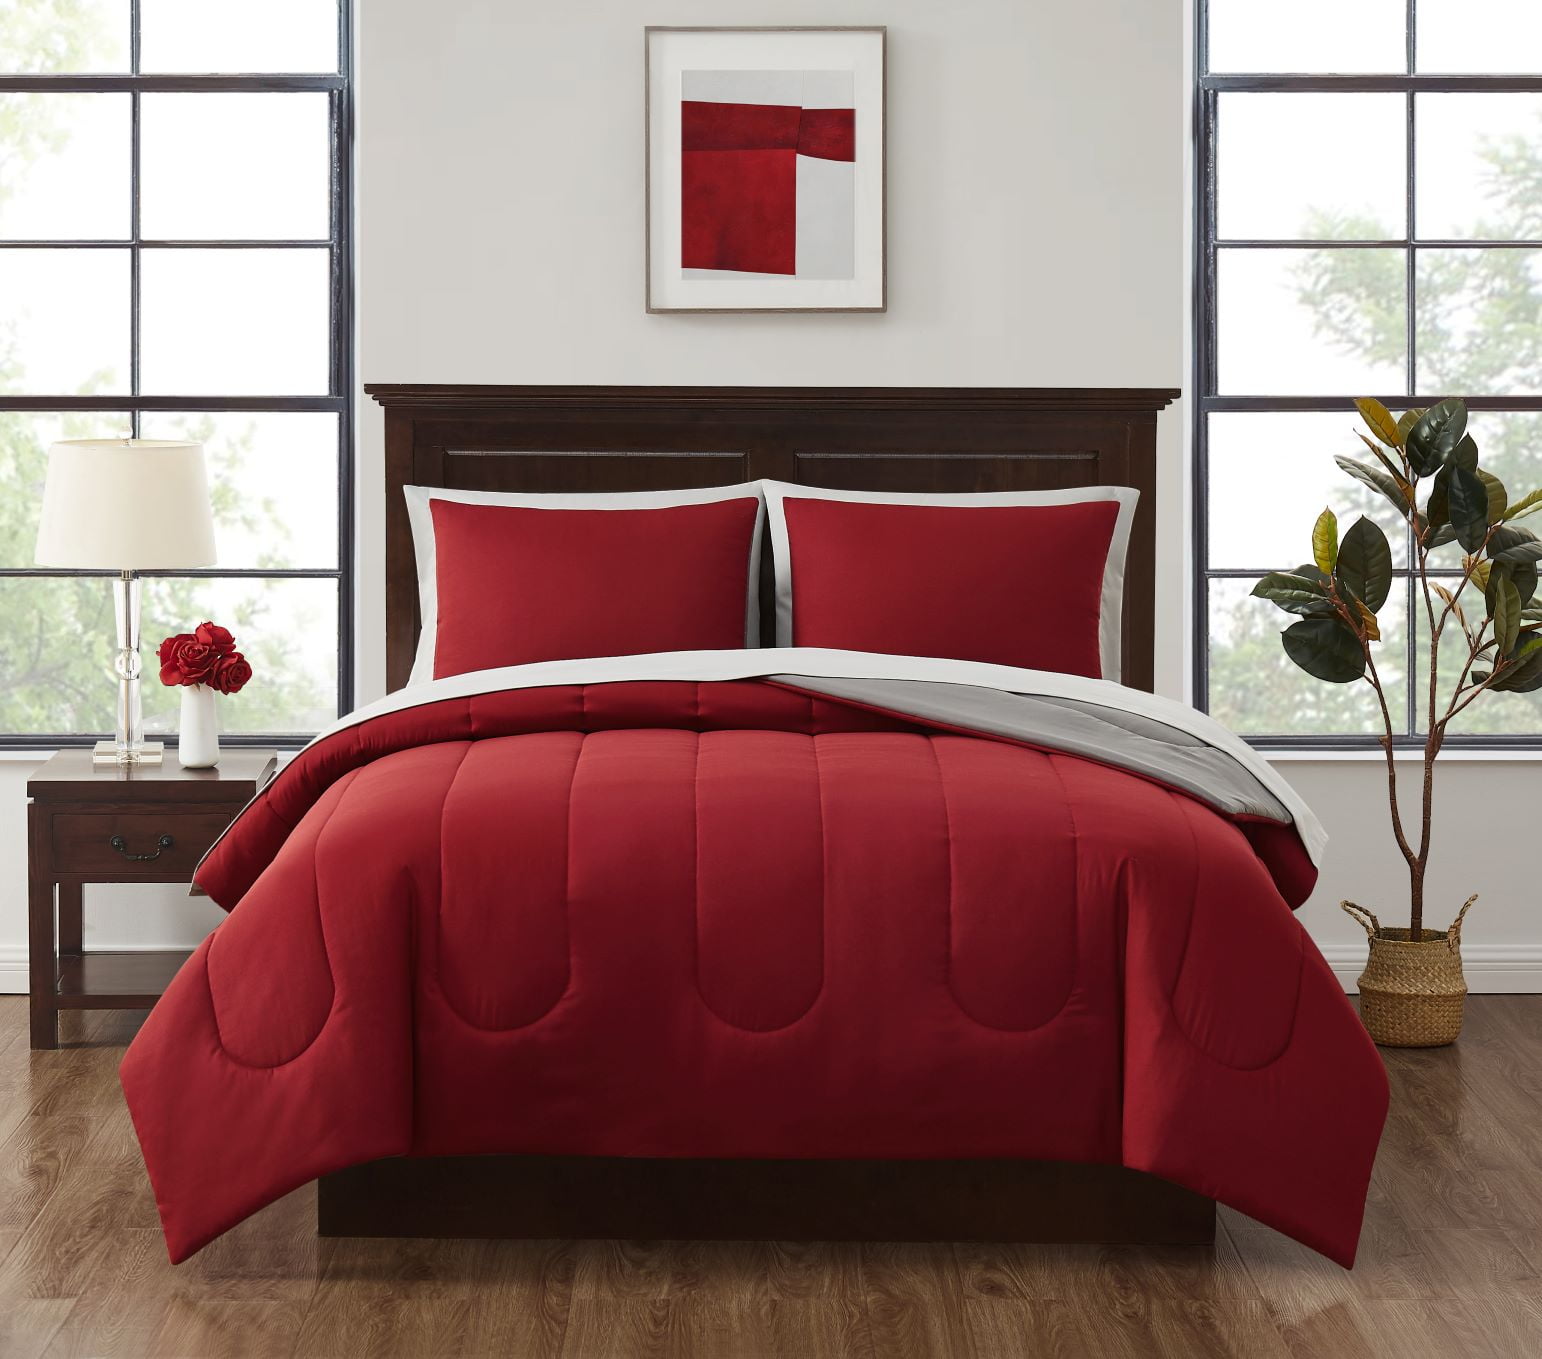 Mainstays Red 7 Piece Bed in a Bag Comforter Set with Sheets, Queen